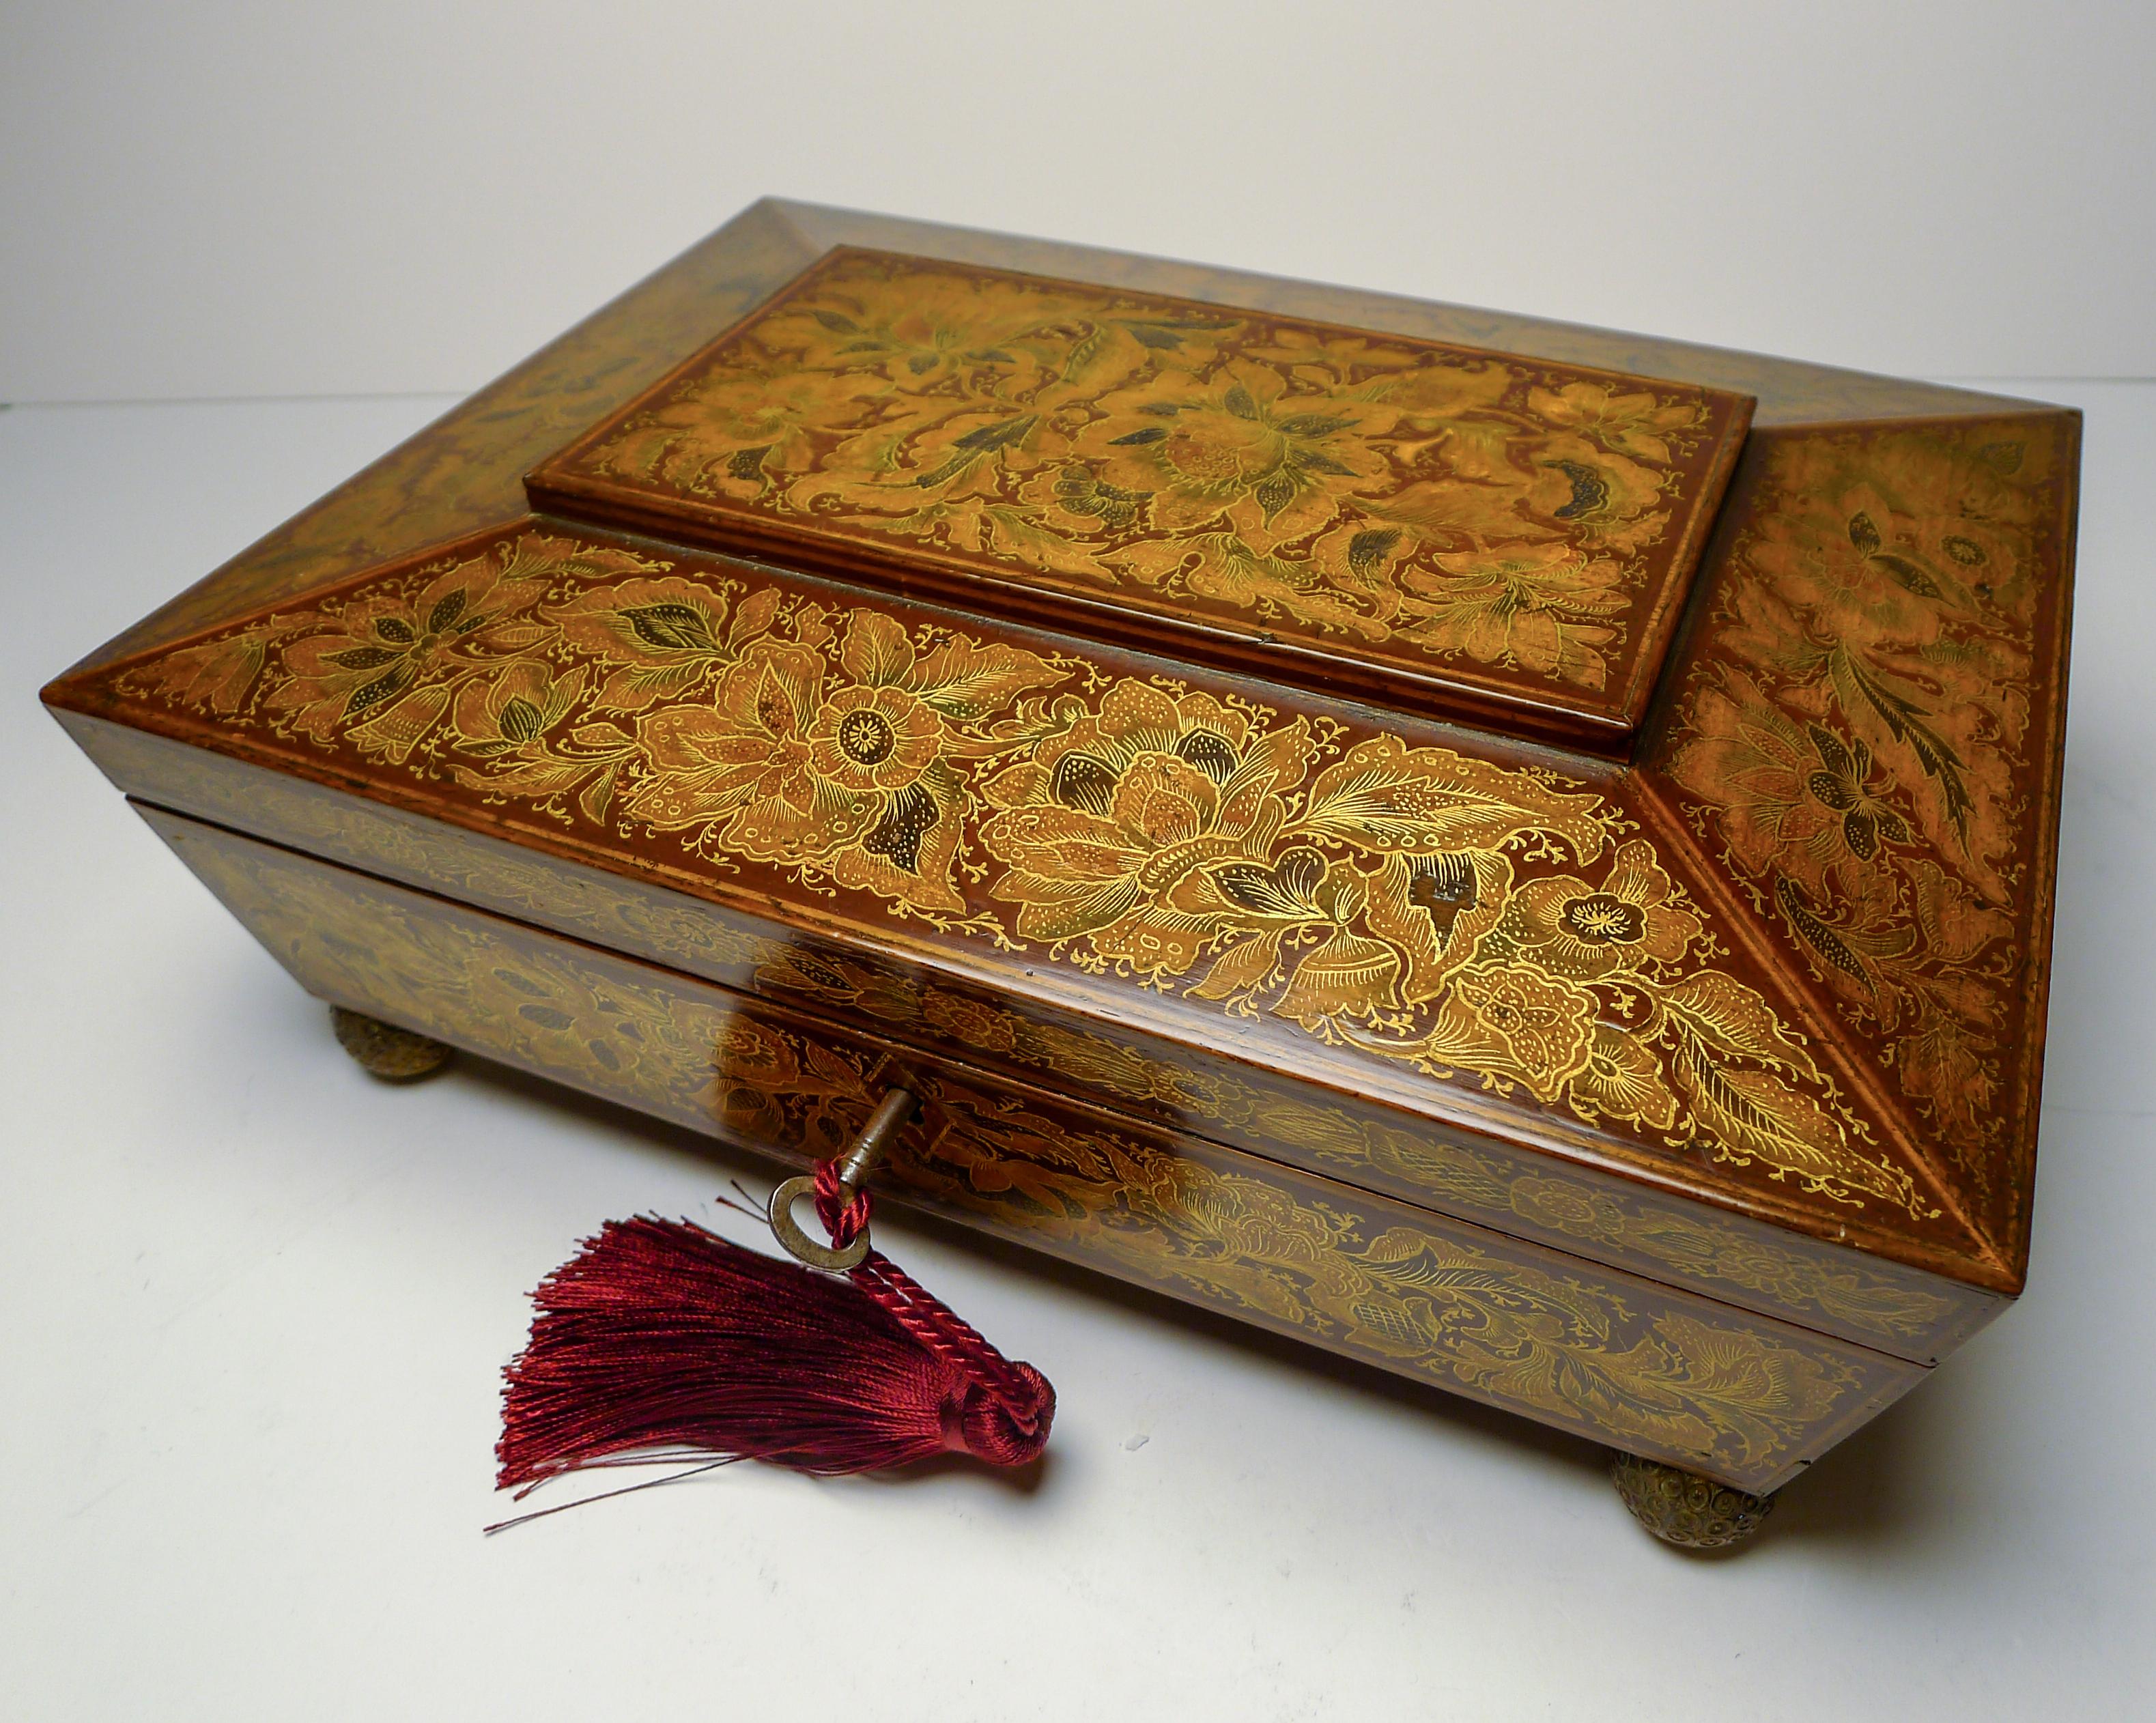 About as exotic and decorative as they get, this magnificent playing card / games box has a deep red / Burgundy background which is smothered in the most exquisite fine penwork with plenty of gold creating an outstanding look. The box has been